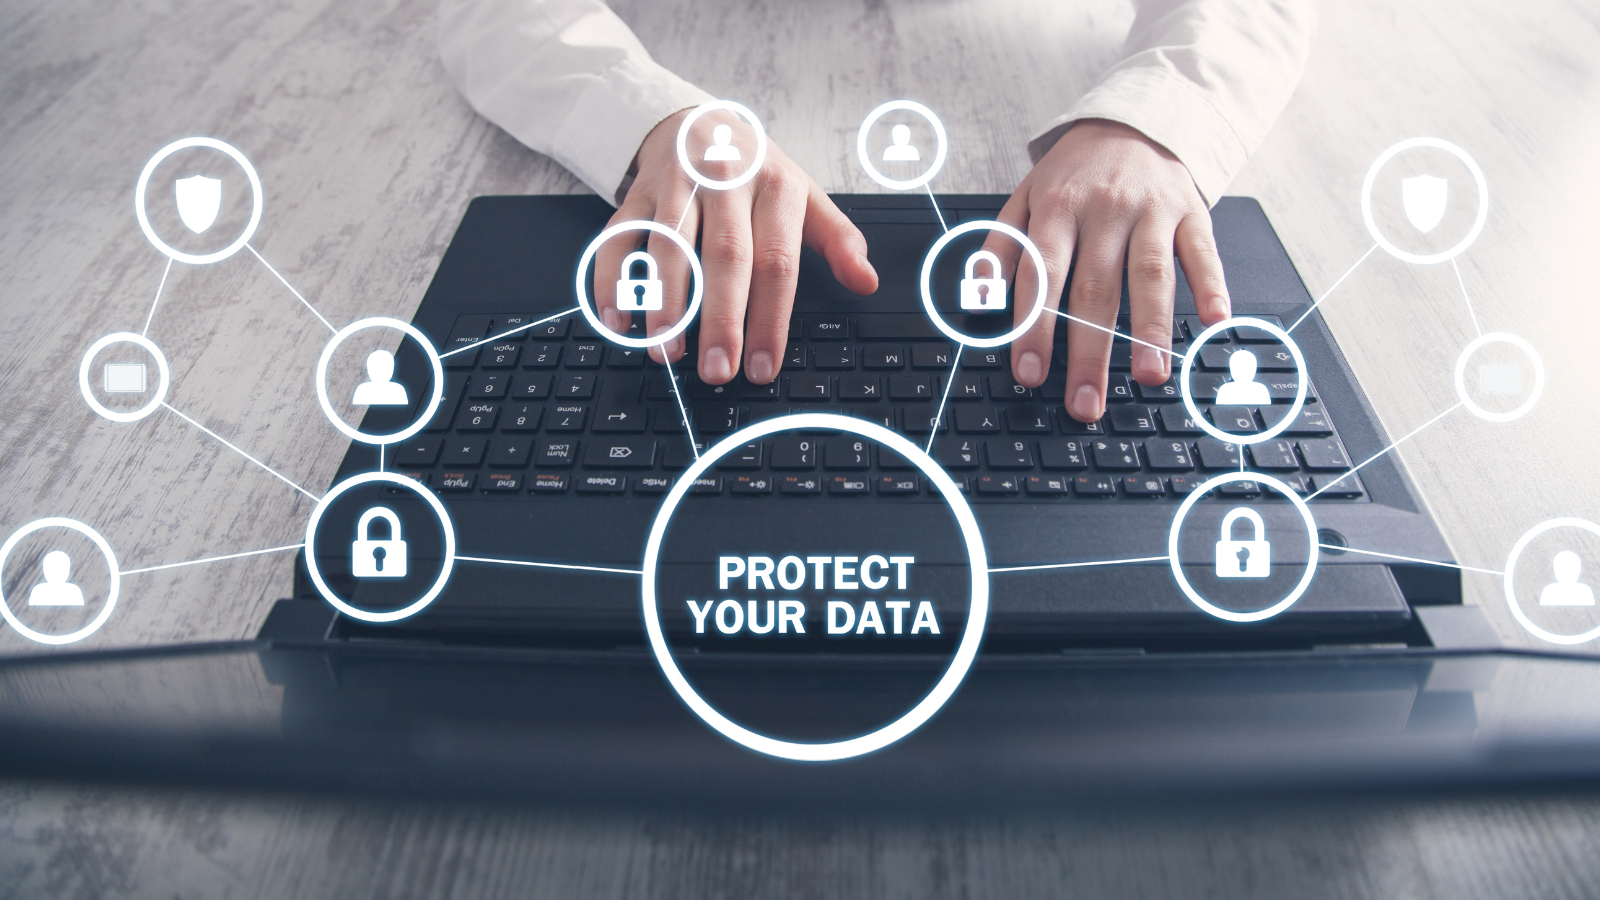 Image showing protect your data